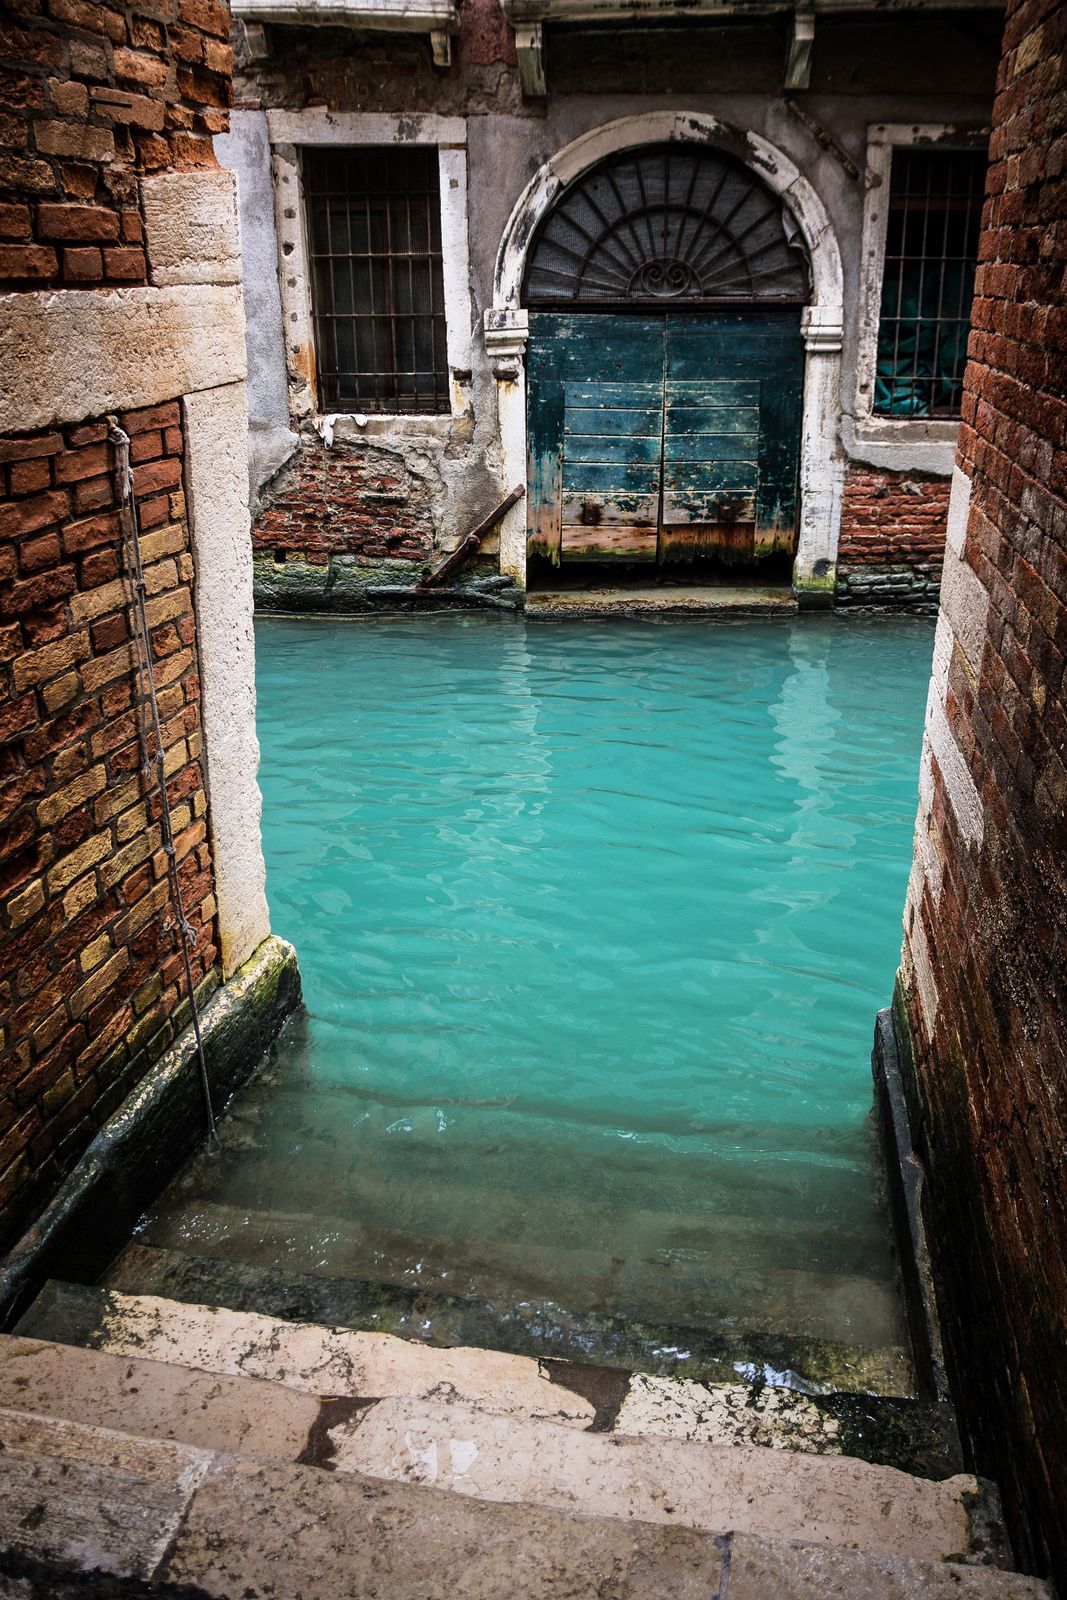 Turquoise Canal in Venice, Italy. From “The 40 Most Breathtaking Abandoned Places In The World”.